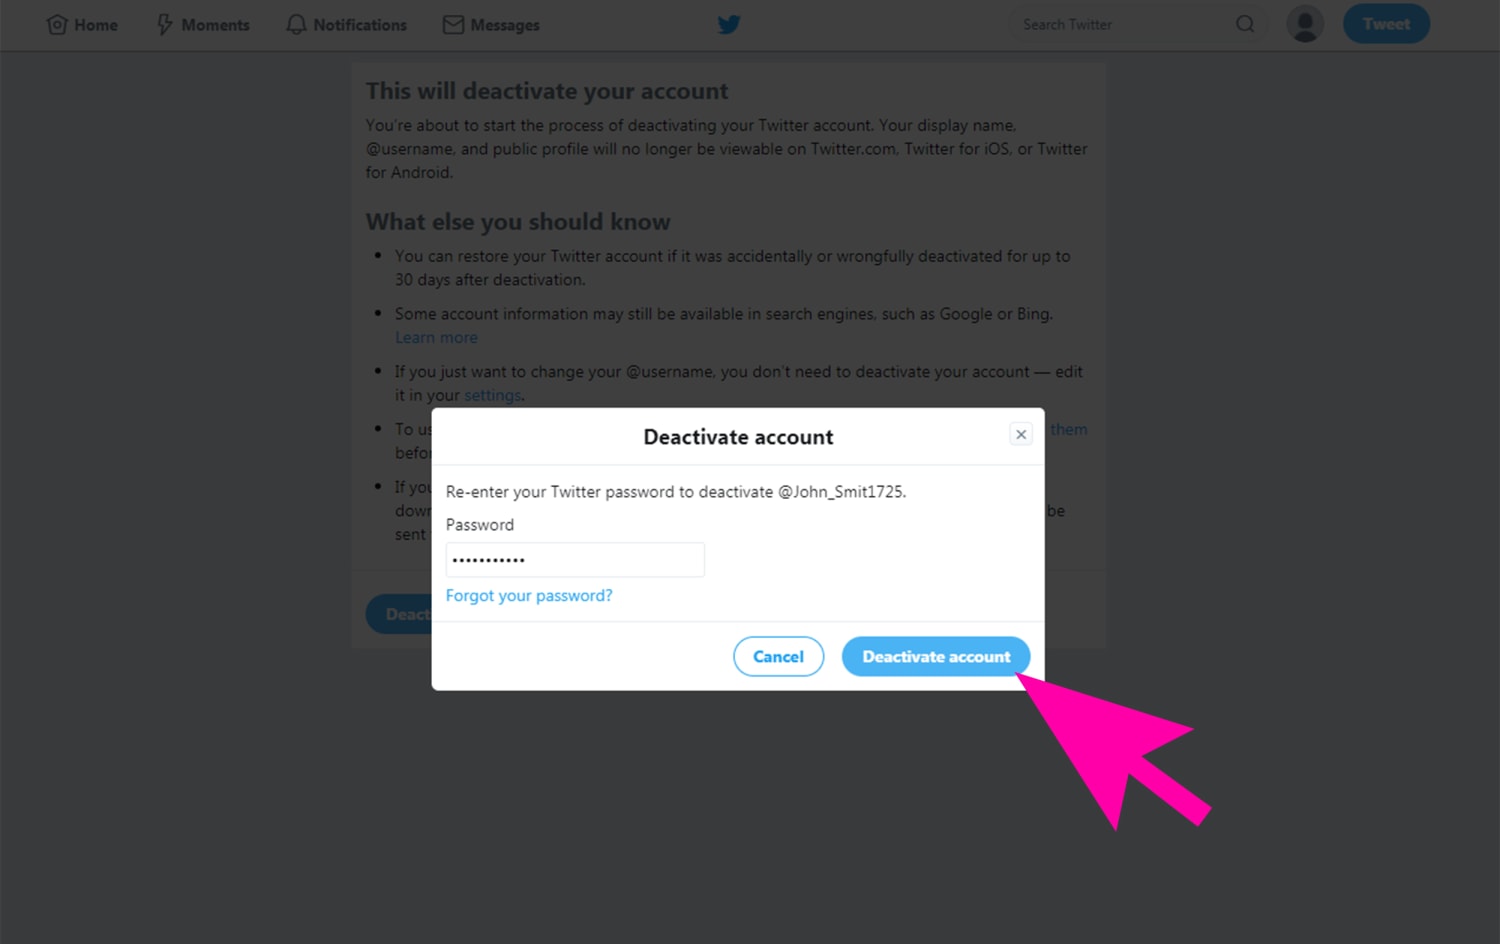 How to delete a Twitter account or deactivate it in 23